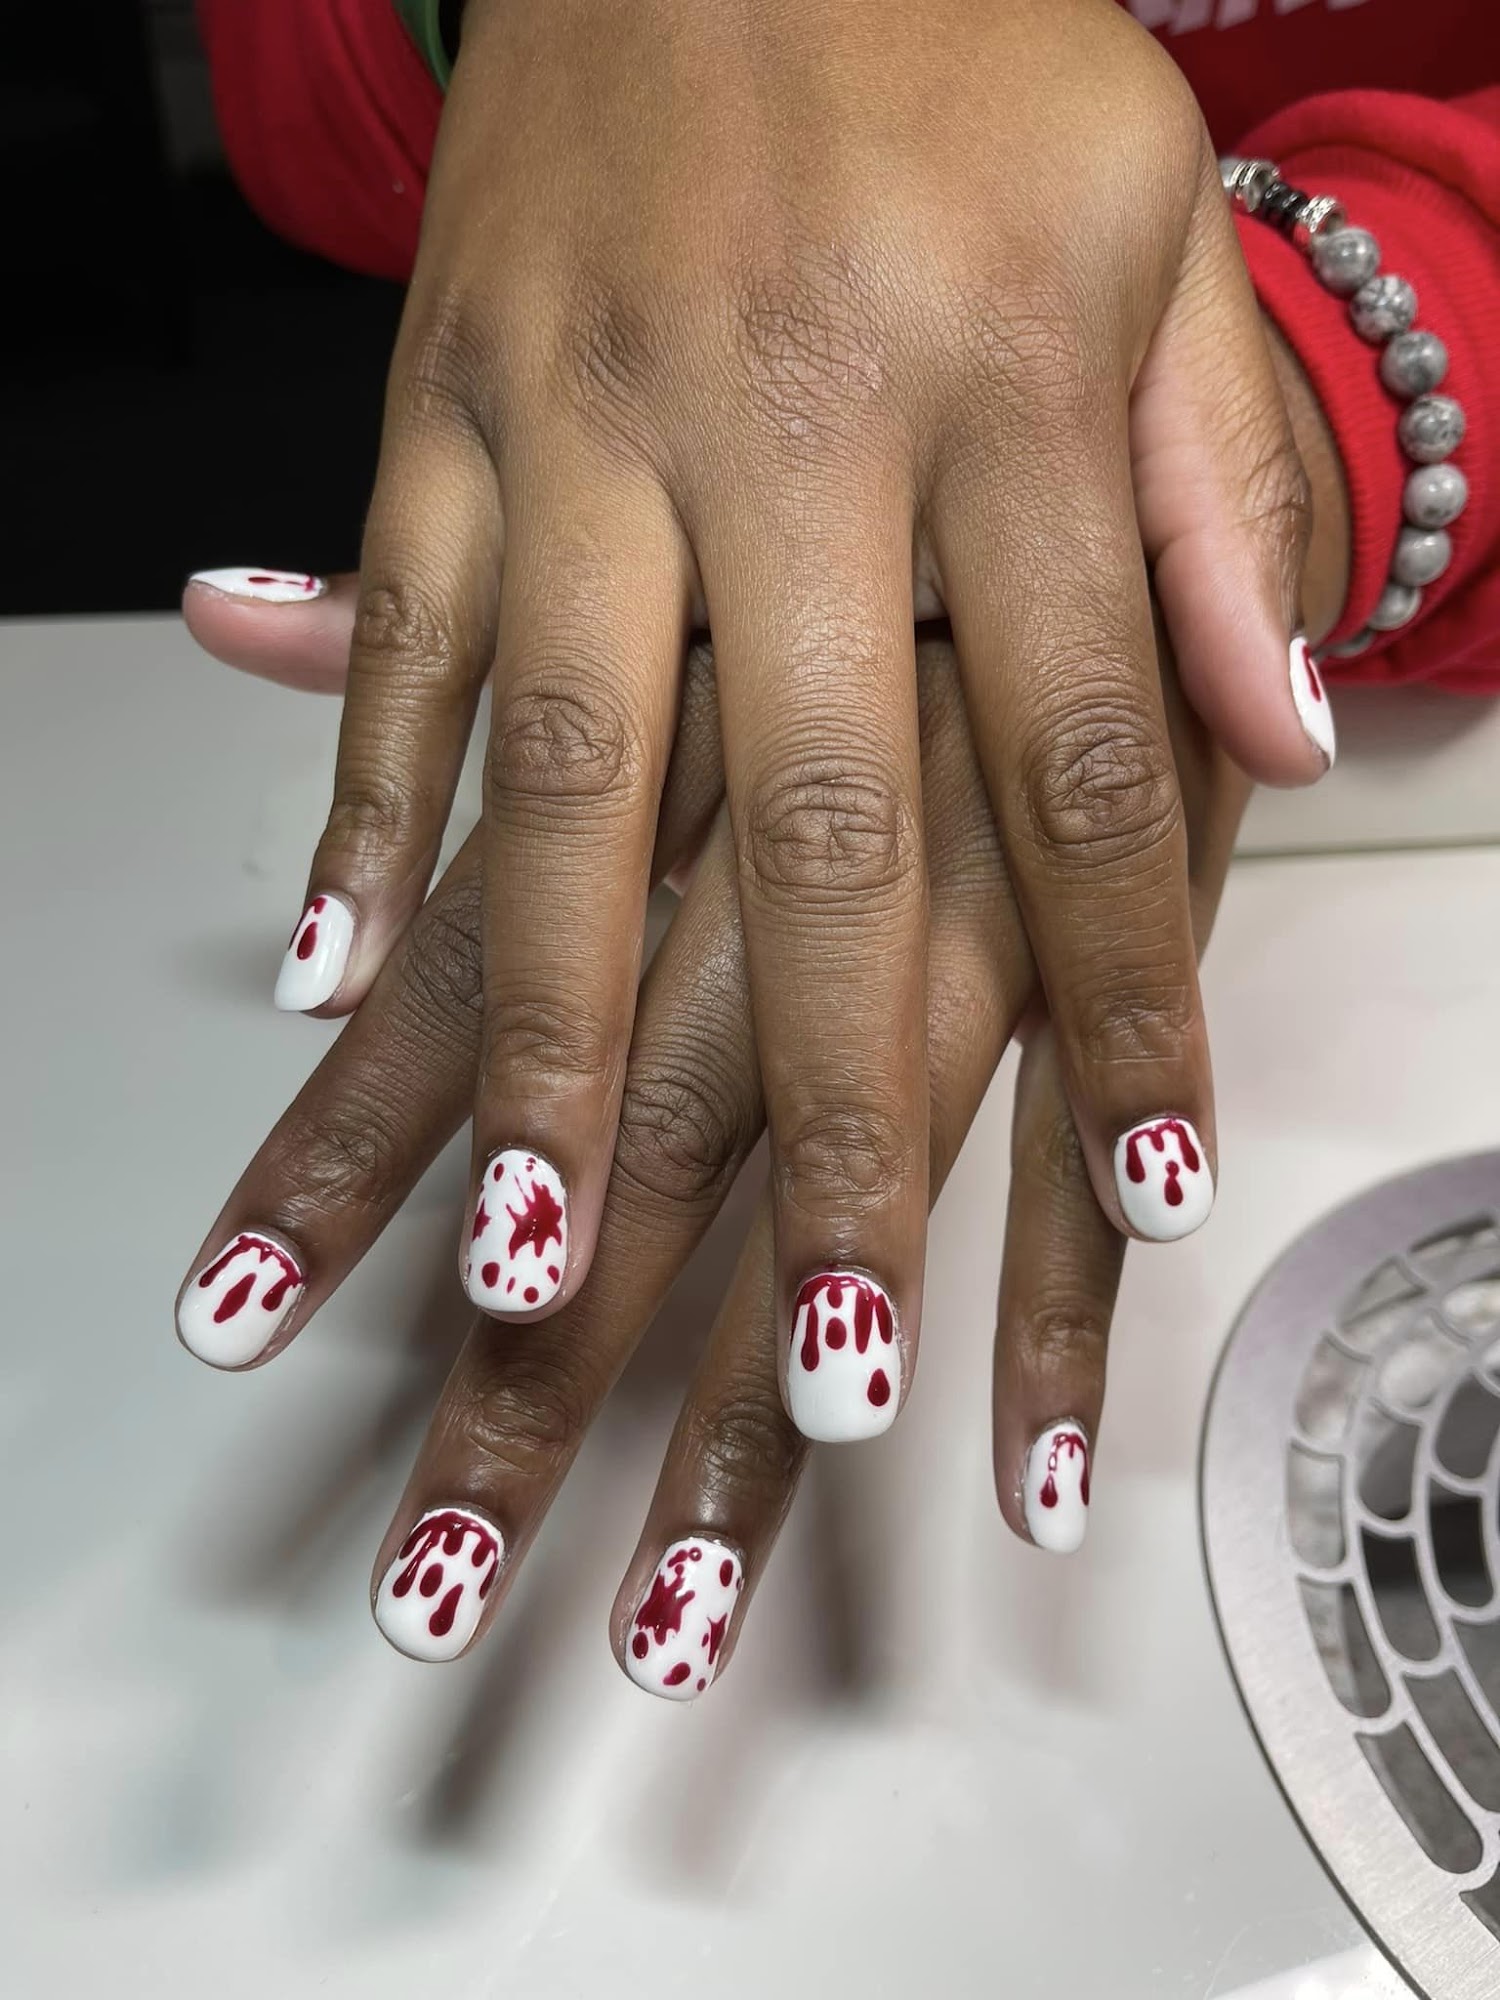 Happy Nails 52 Main St, Stafford Connecticut 06076